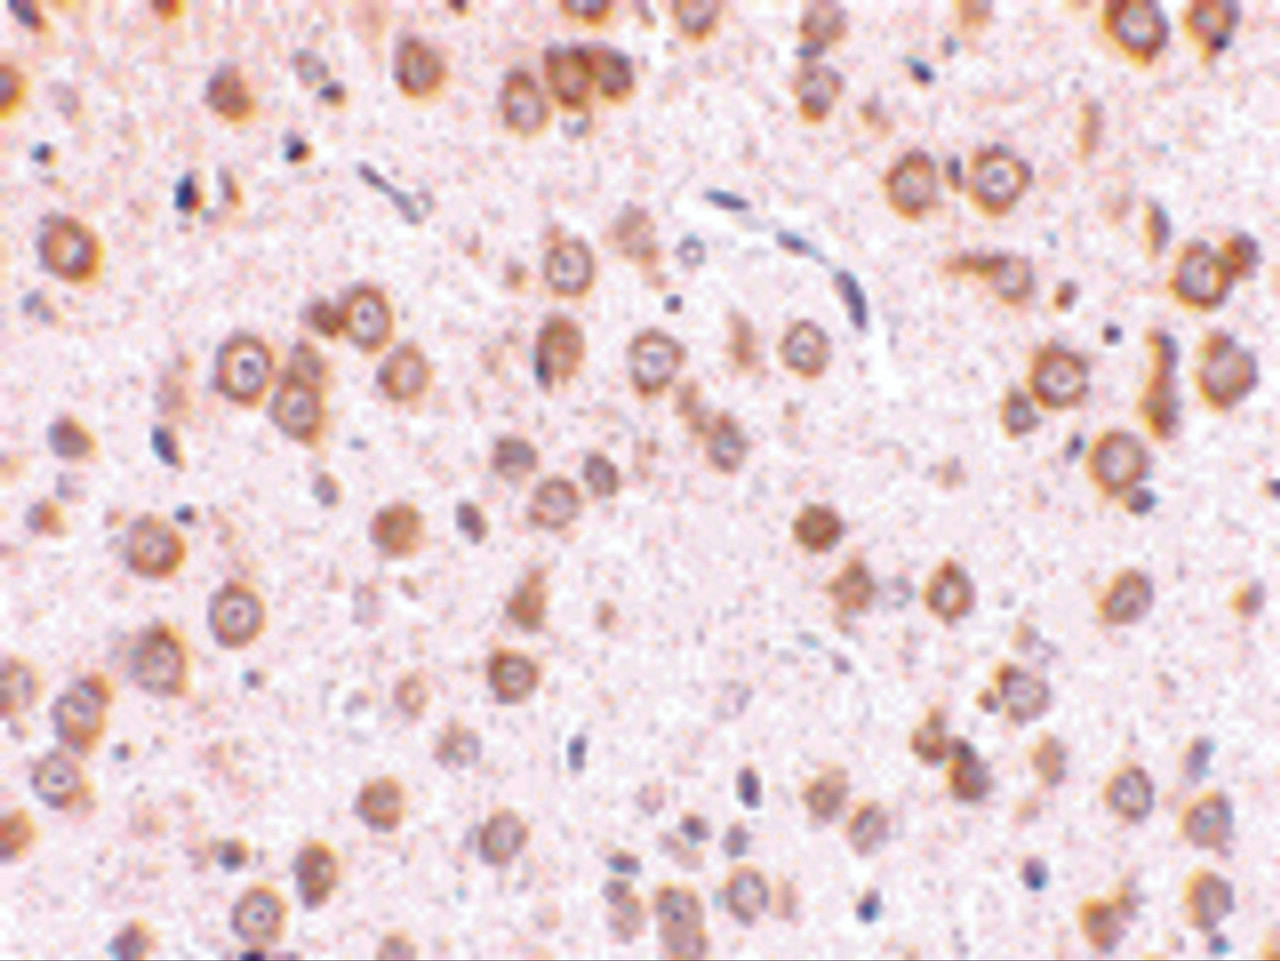 Immunohistochemistry of TLR5 in rat brain tissue with TLR5 antibody at 10 ug/mL.